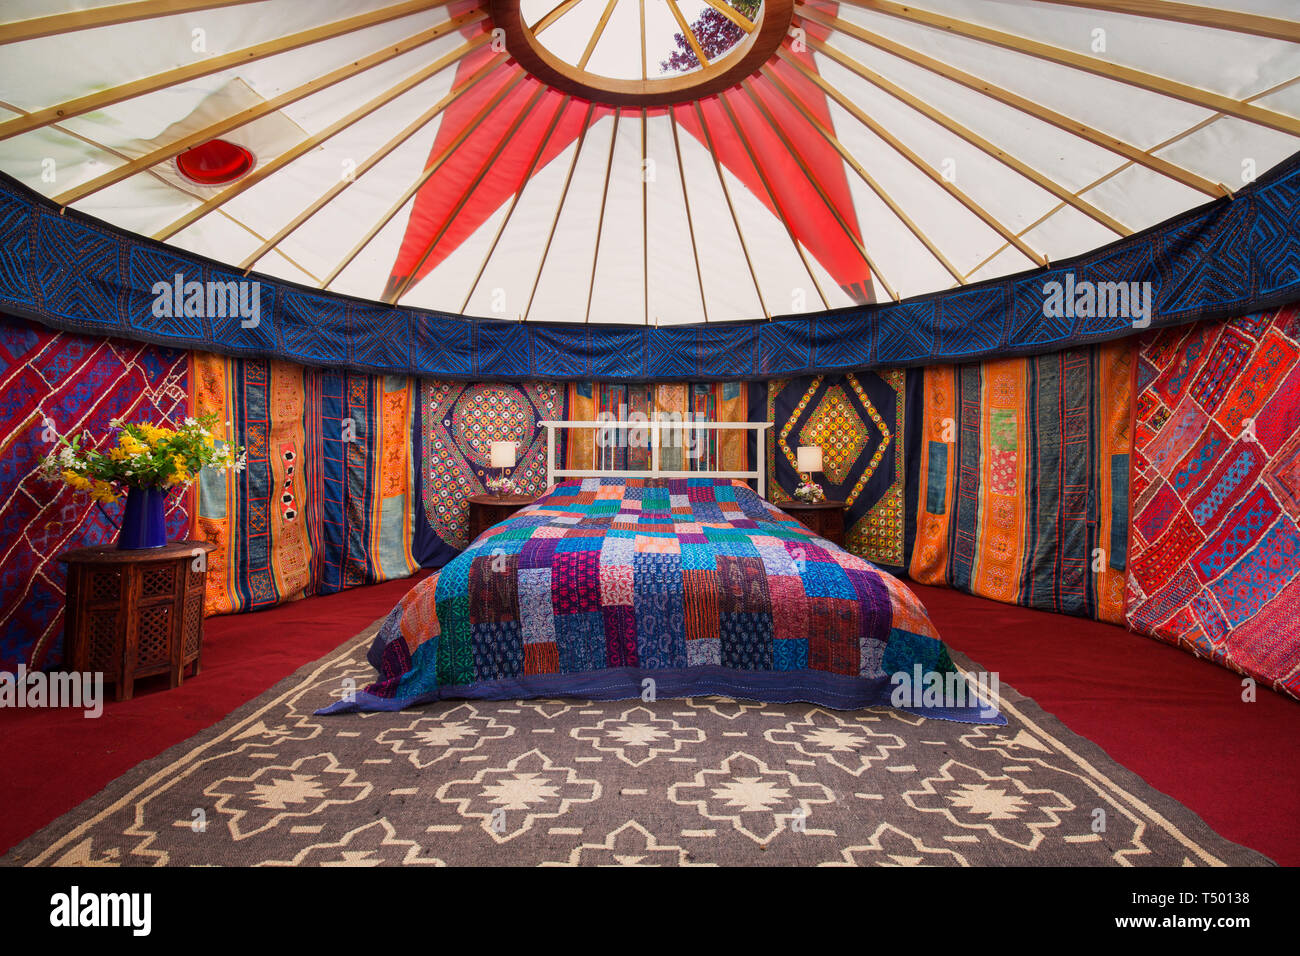 The interior of a bright colourful Moroccan style yurt tent Stock Photo